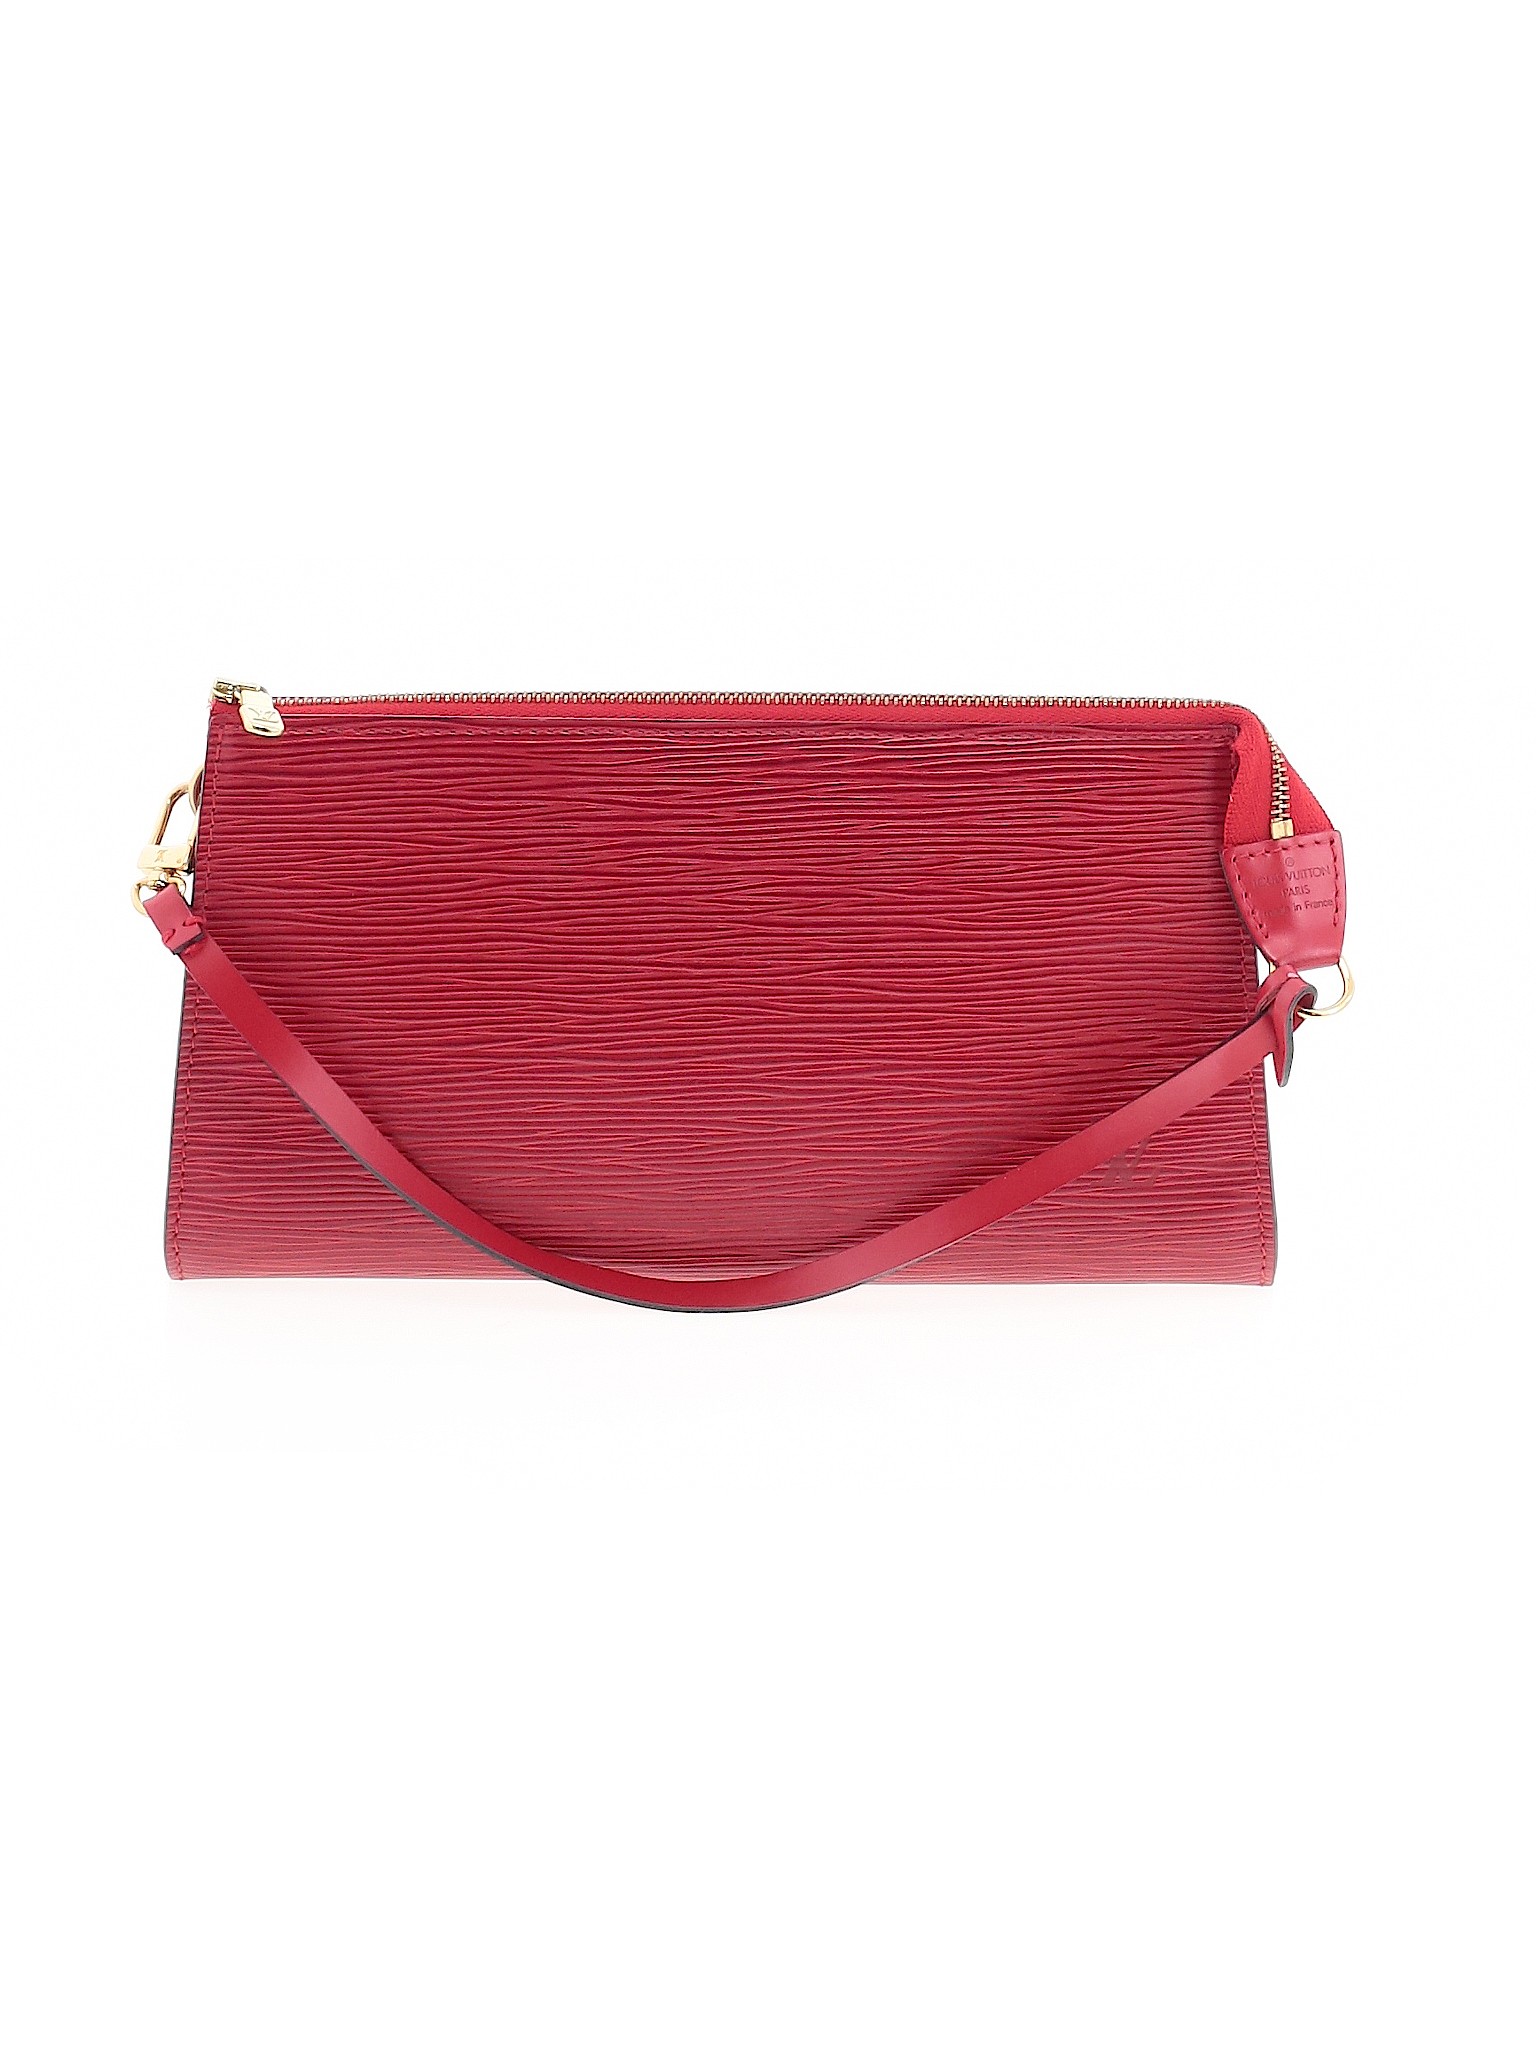 Louis Vuitton Women Red Leather Shoulder Bag One Size | eBay